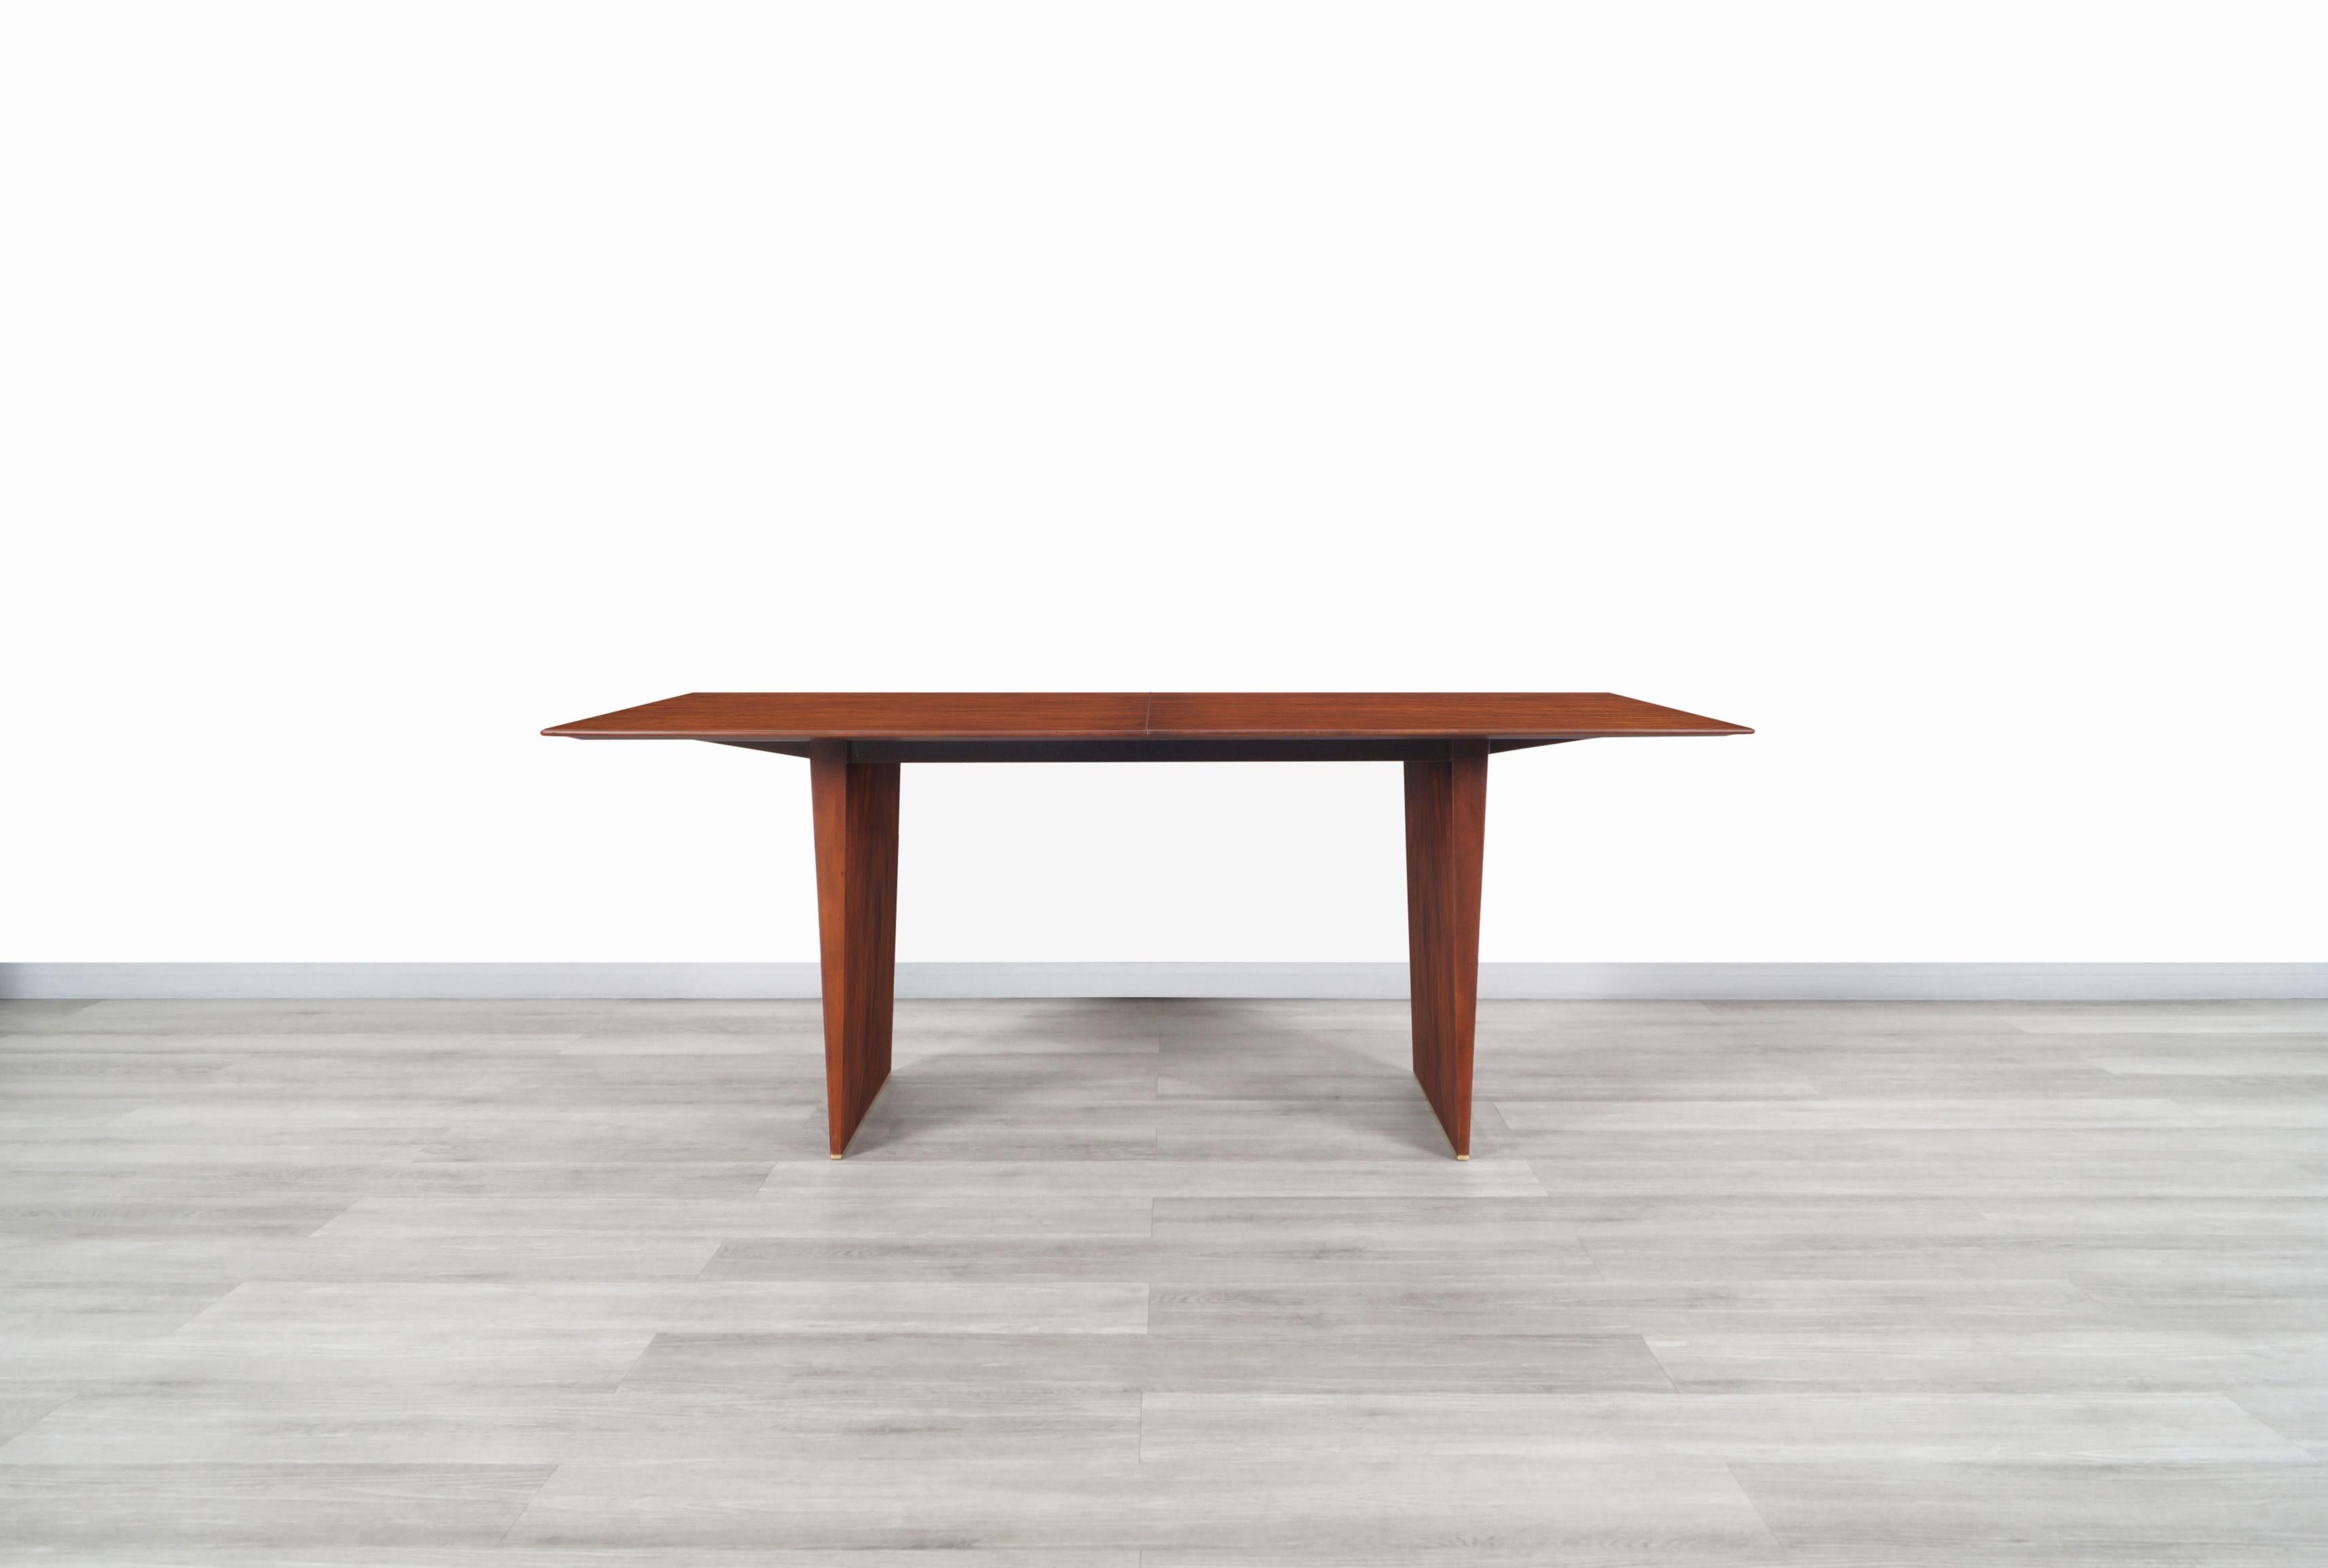 Amazing vintage walnut dining table model 5460 designed by Edward Wormley for Dunbar in the United States, circa 1950s. This dining table has a modernist design and has been built with Fine walnut wood that expresses a warm combination of colors